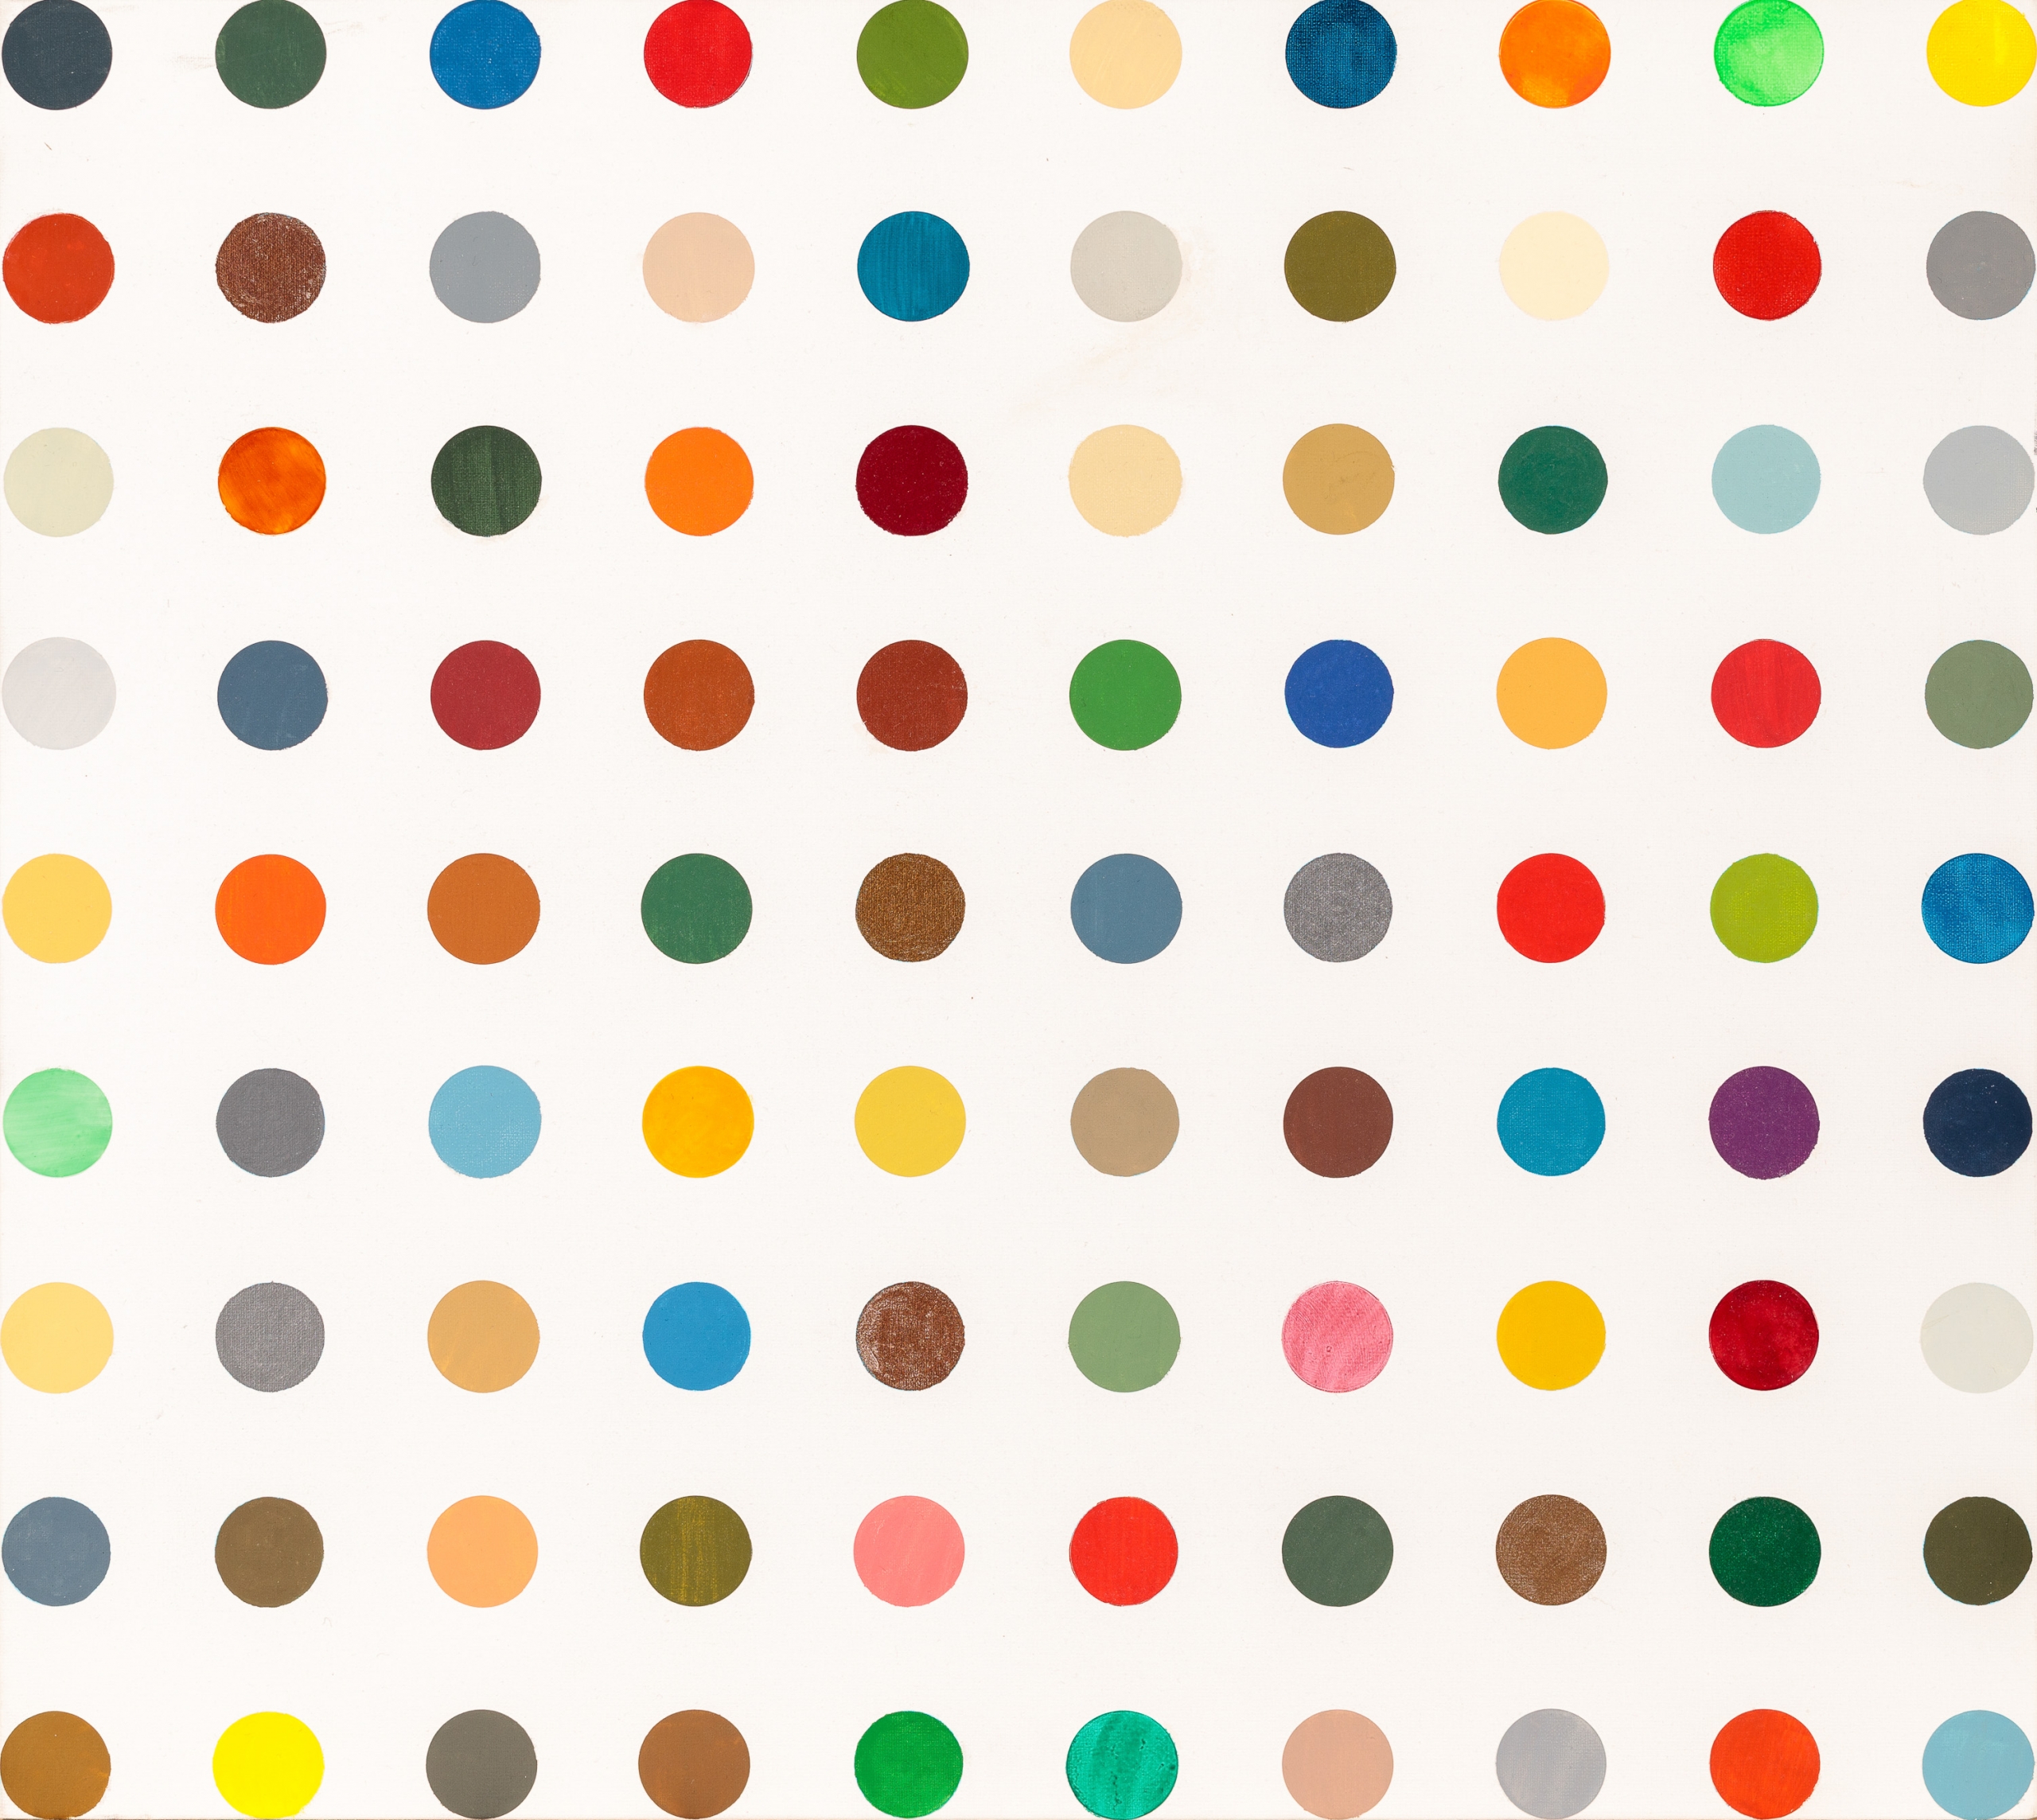 Damien Hirst, Painting by Numbers I